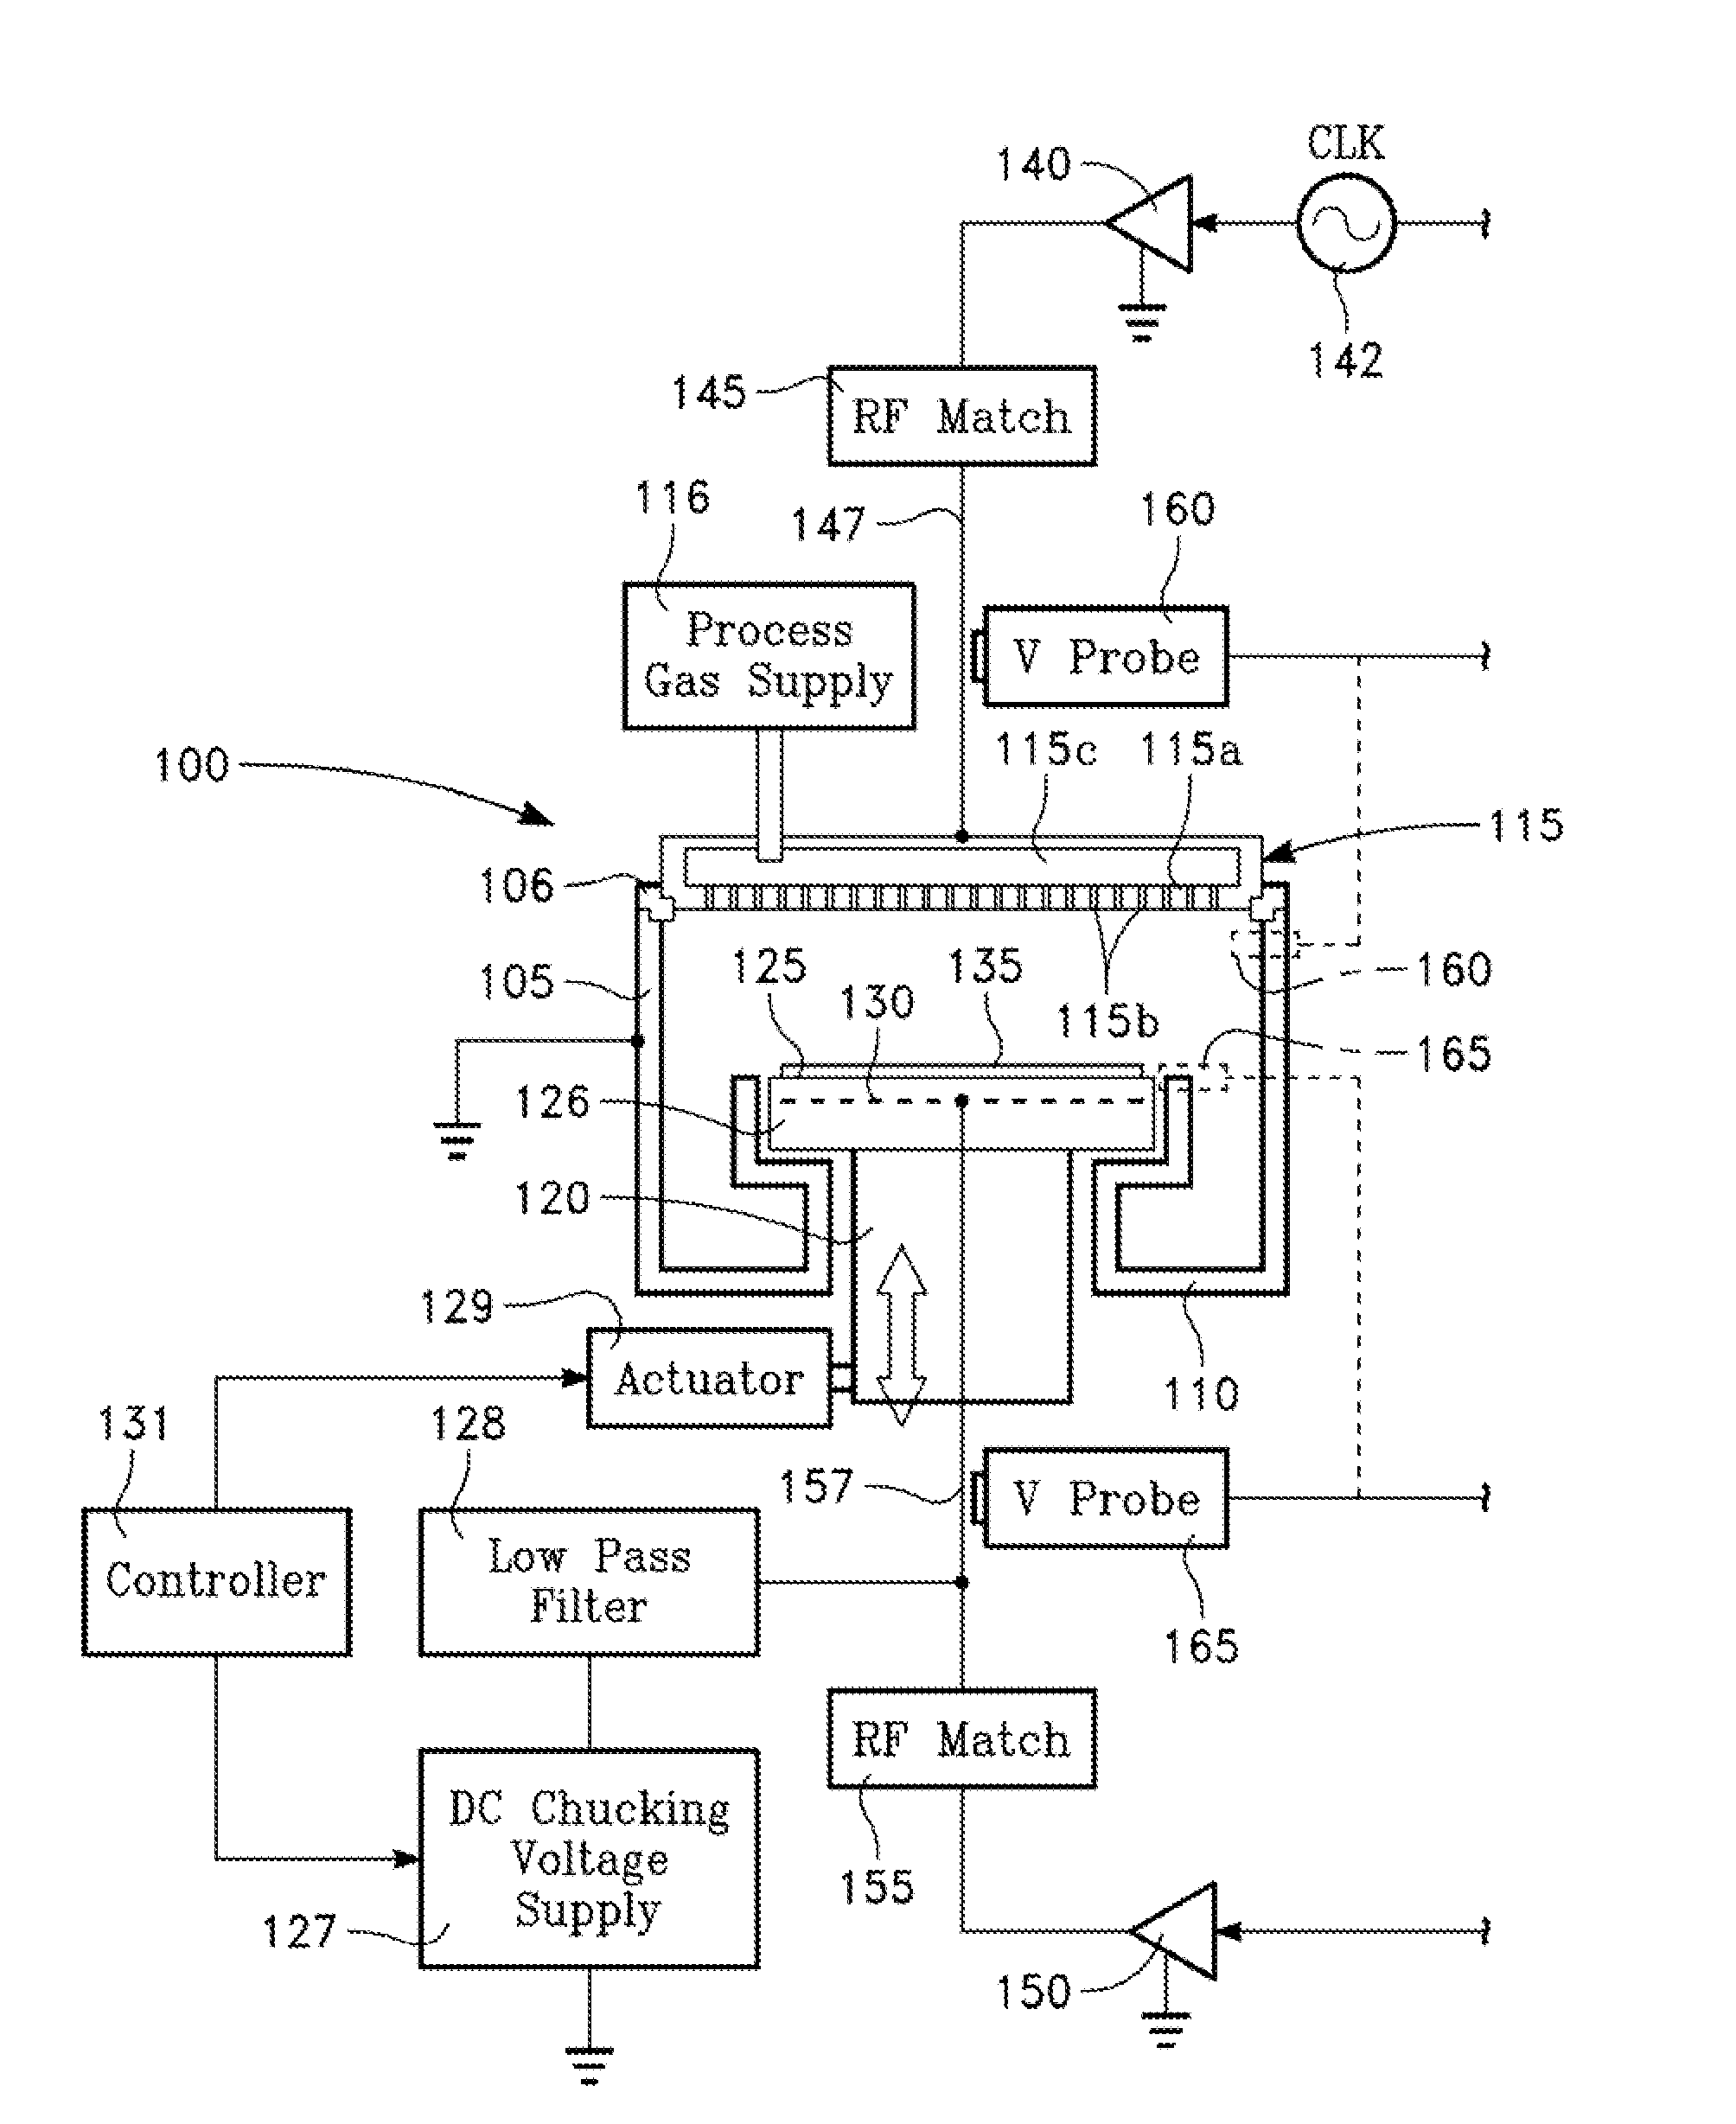 Two-phase operation of plasma chamber by phase locked loop